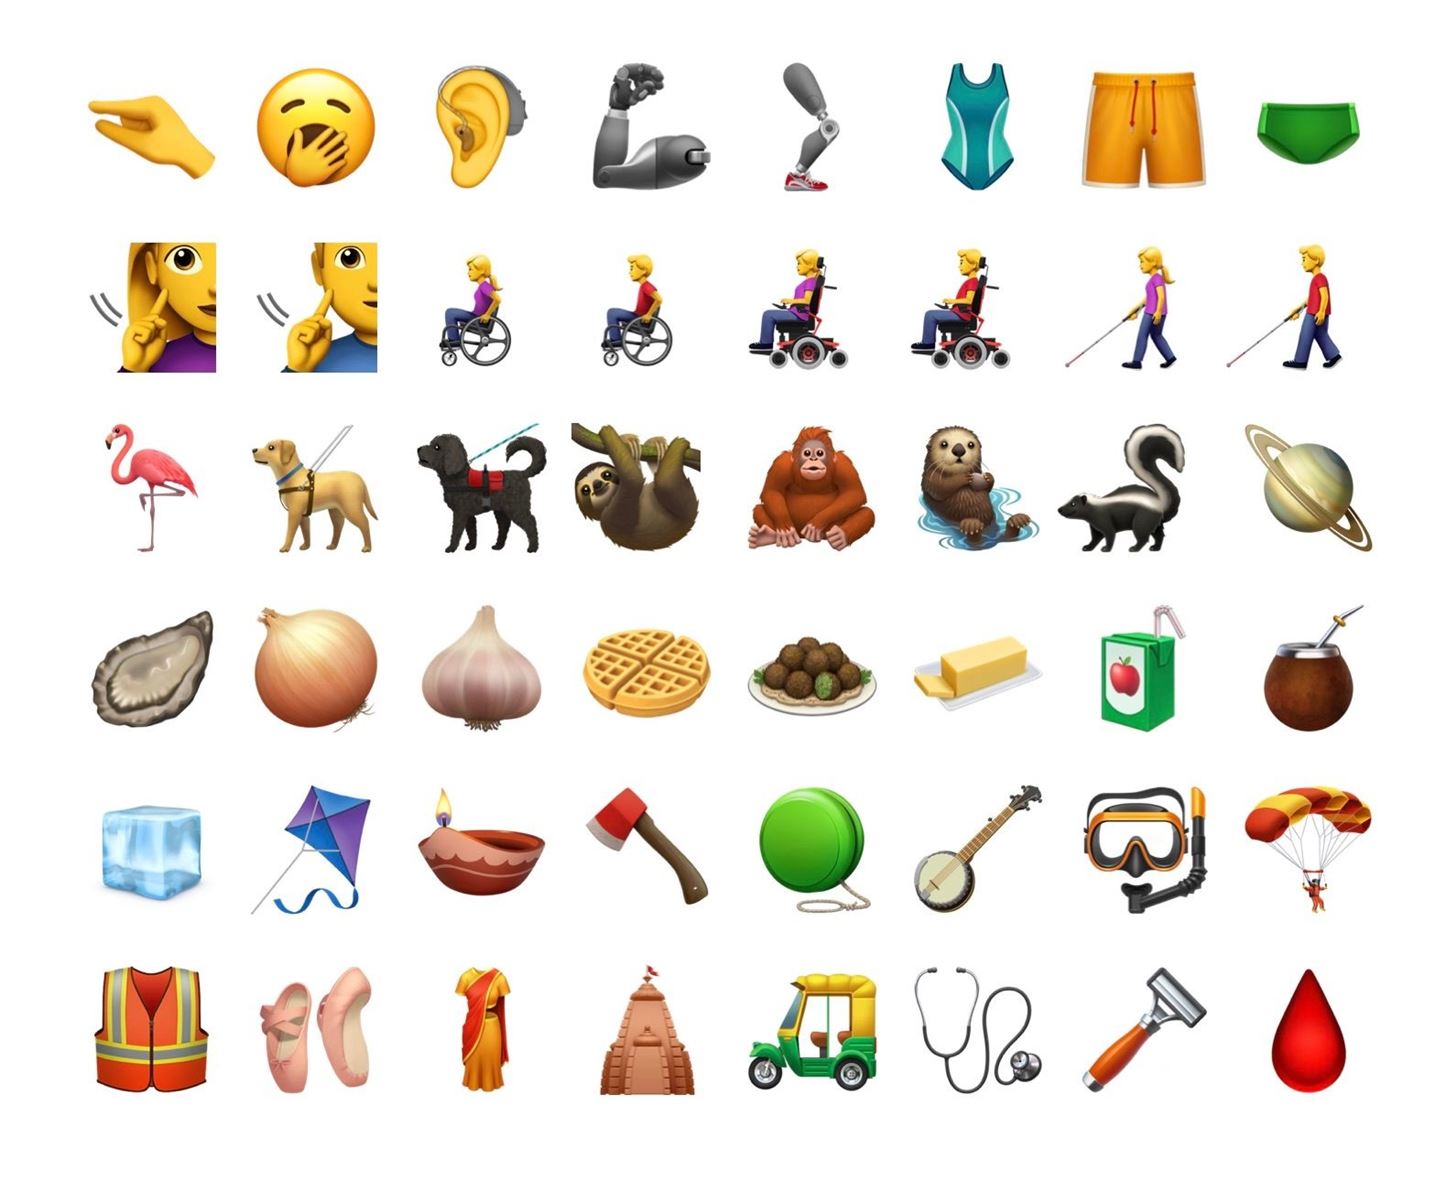 Apple Just Released iOS 13.2 Developer Beta 2 for iPhone, Introduces New Emoji